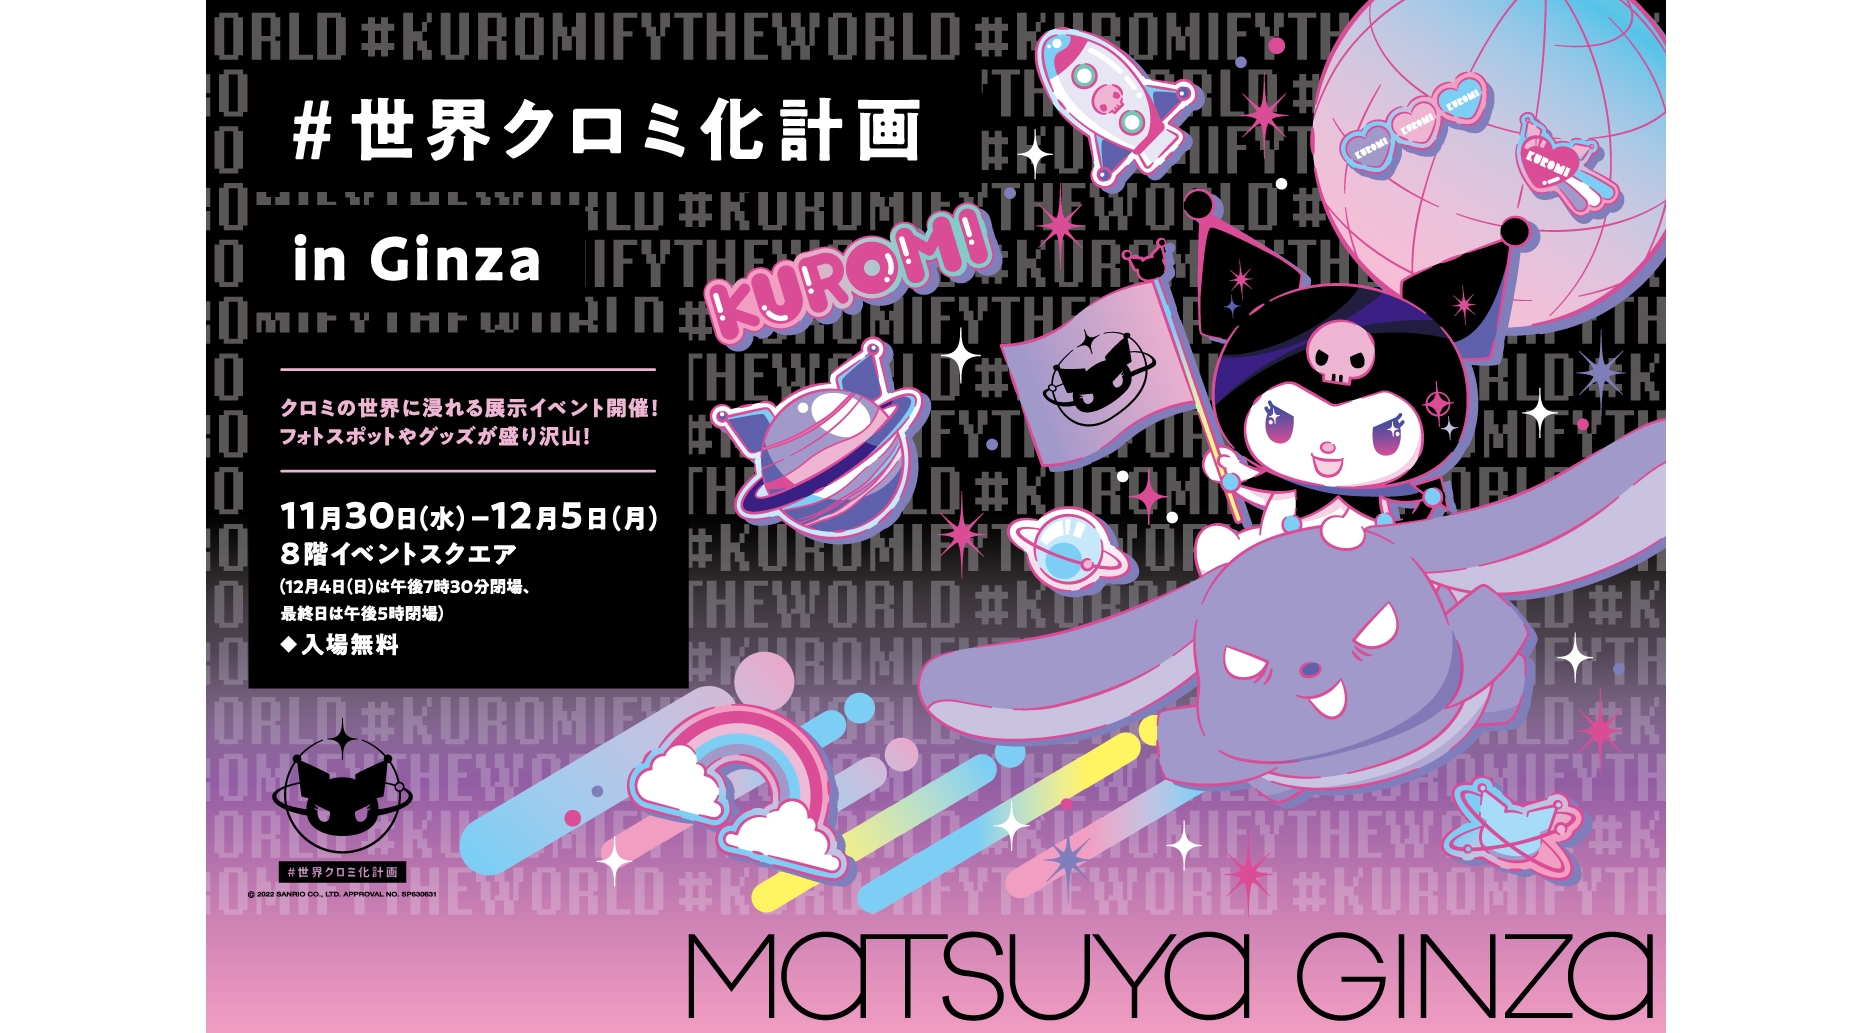 Free #KuromifyTheWorld Project in Ginza to Open This Month, MOSHI MOSHI  NIPPON